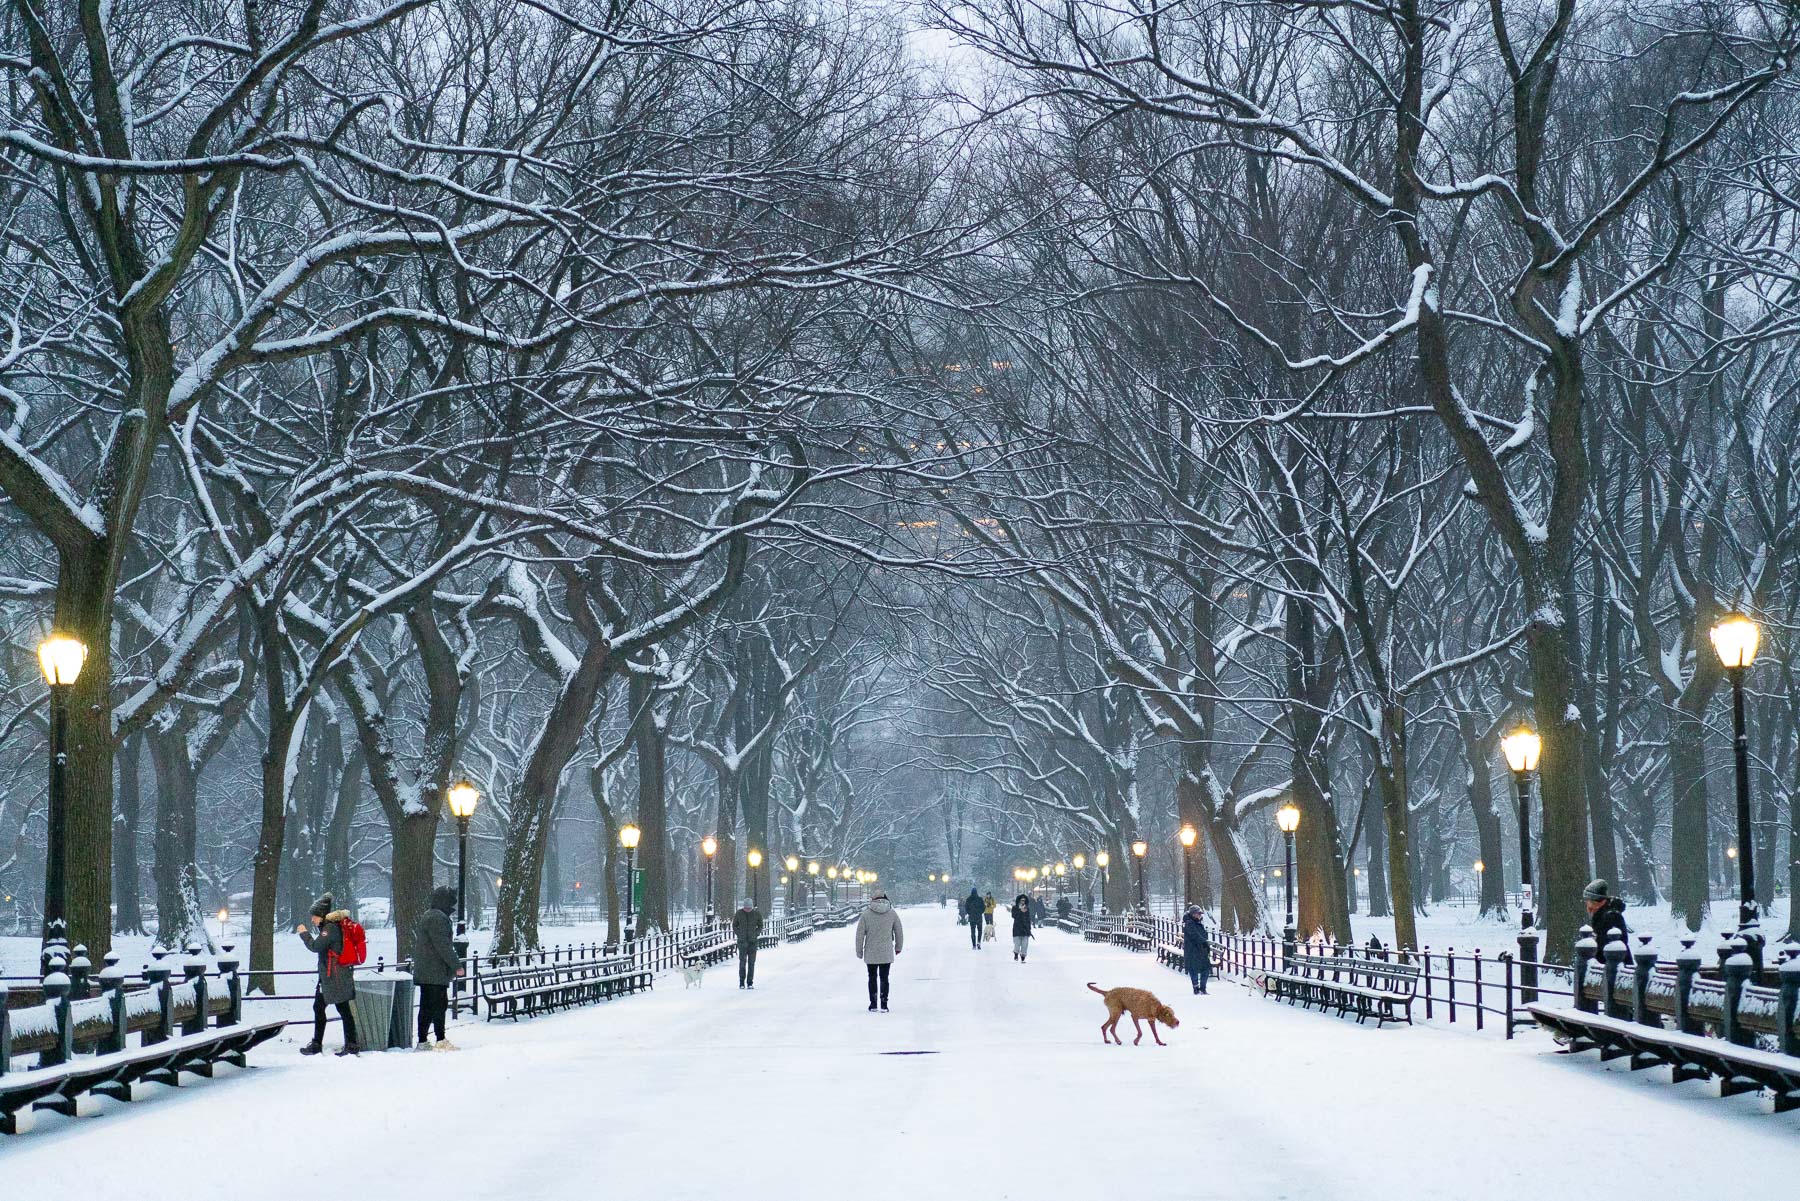 The Mall in Central Park in the Snow